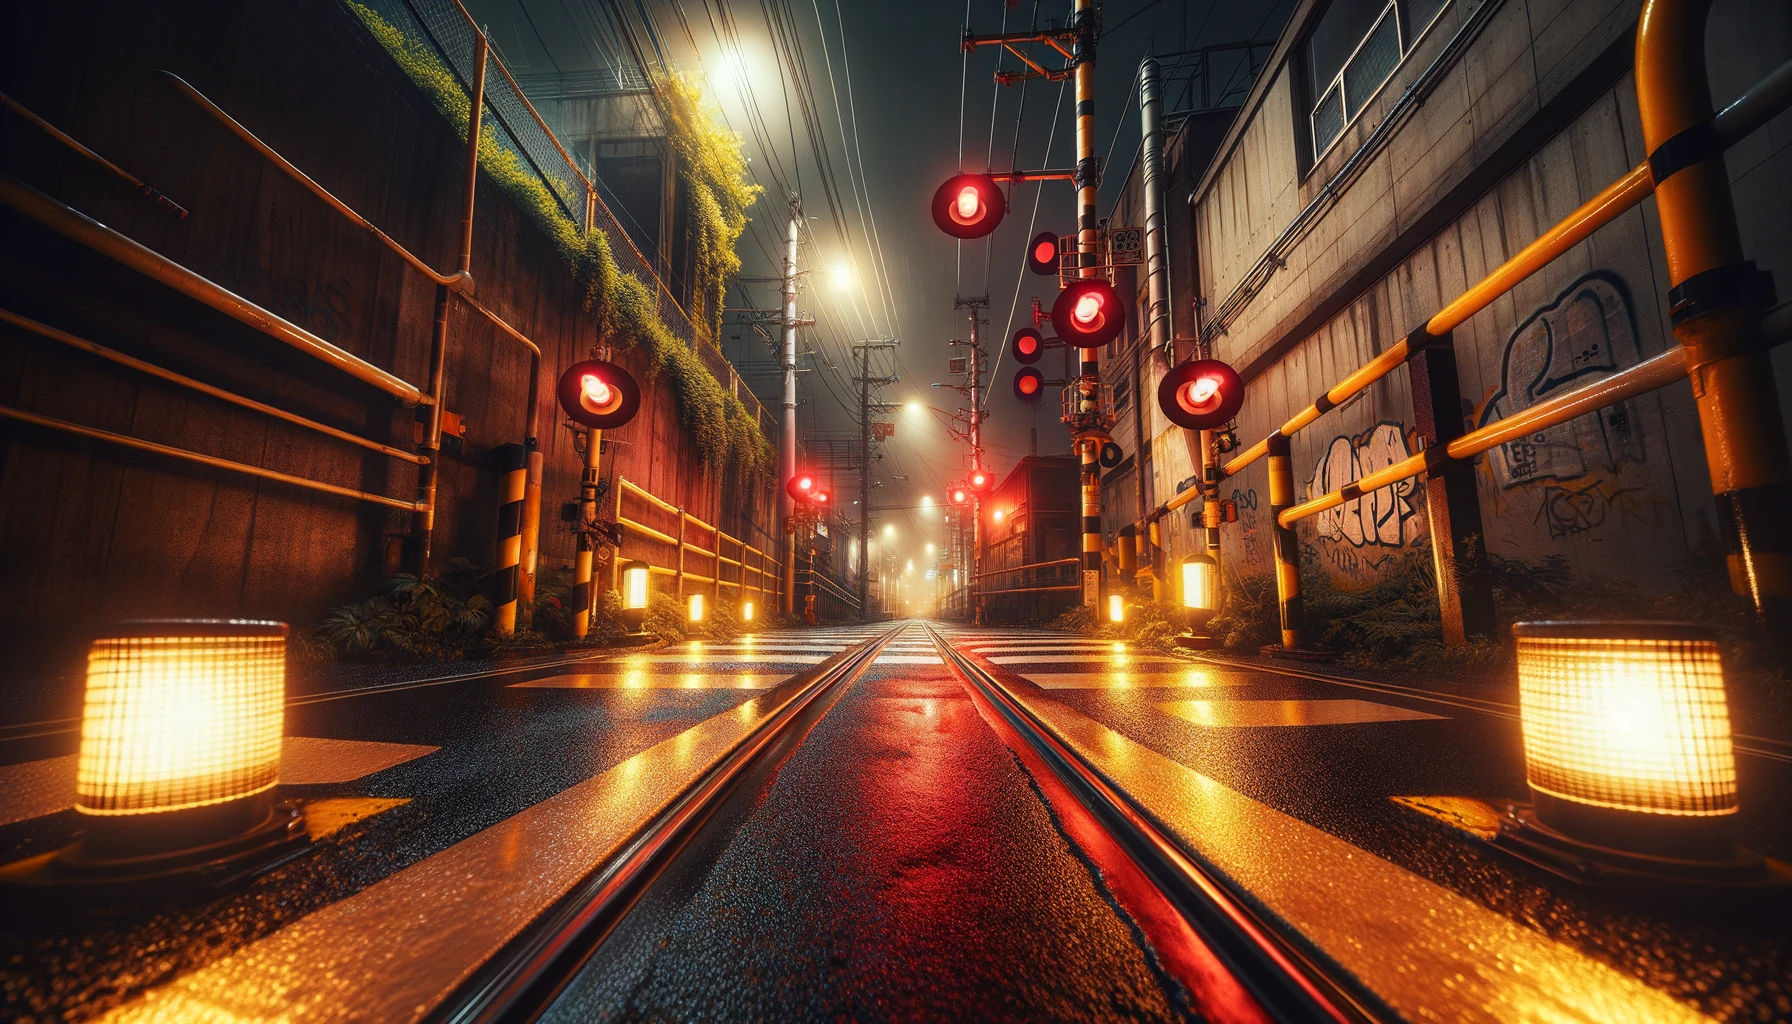 An ultra-high-resolution image depicting a nighttime scene on a deserted urban street leading to a railway crossing. The street is wet, with light reflections and white road markings. A building on the left side has a light gray facade with bright red graffiti, a red-lit window, and is lined with pipes and wires. A brown metal fence with barbed wire and a leaning pole with a yellow stripe is on the right, separating the sidewalk from the railway tracks. The background showcases illuminated street lamps, greenery, and building silhouettes, evoking a quiet, mysterious urban atmosphere.